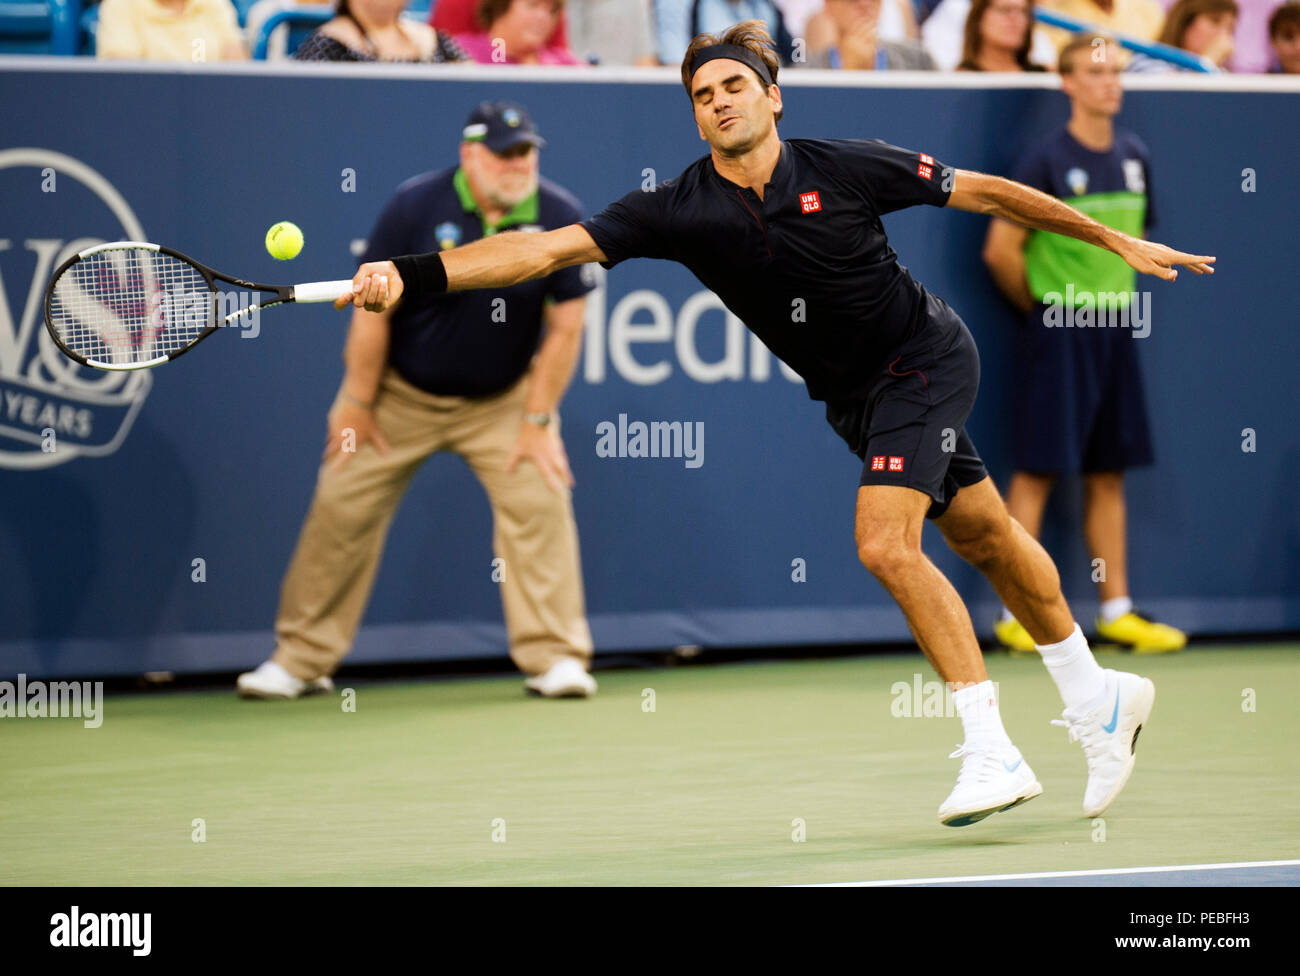 Mason, Ohio, USA. August 14, 2018: Roger Federer (SUI) reaches for the ball in the match against Peter Gojowczyk (GER) at the Western Southern Open in Mason, Ohio, USA. Brent Clark/Alamy Live News Stock Photo